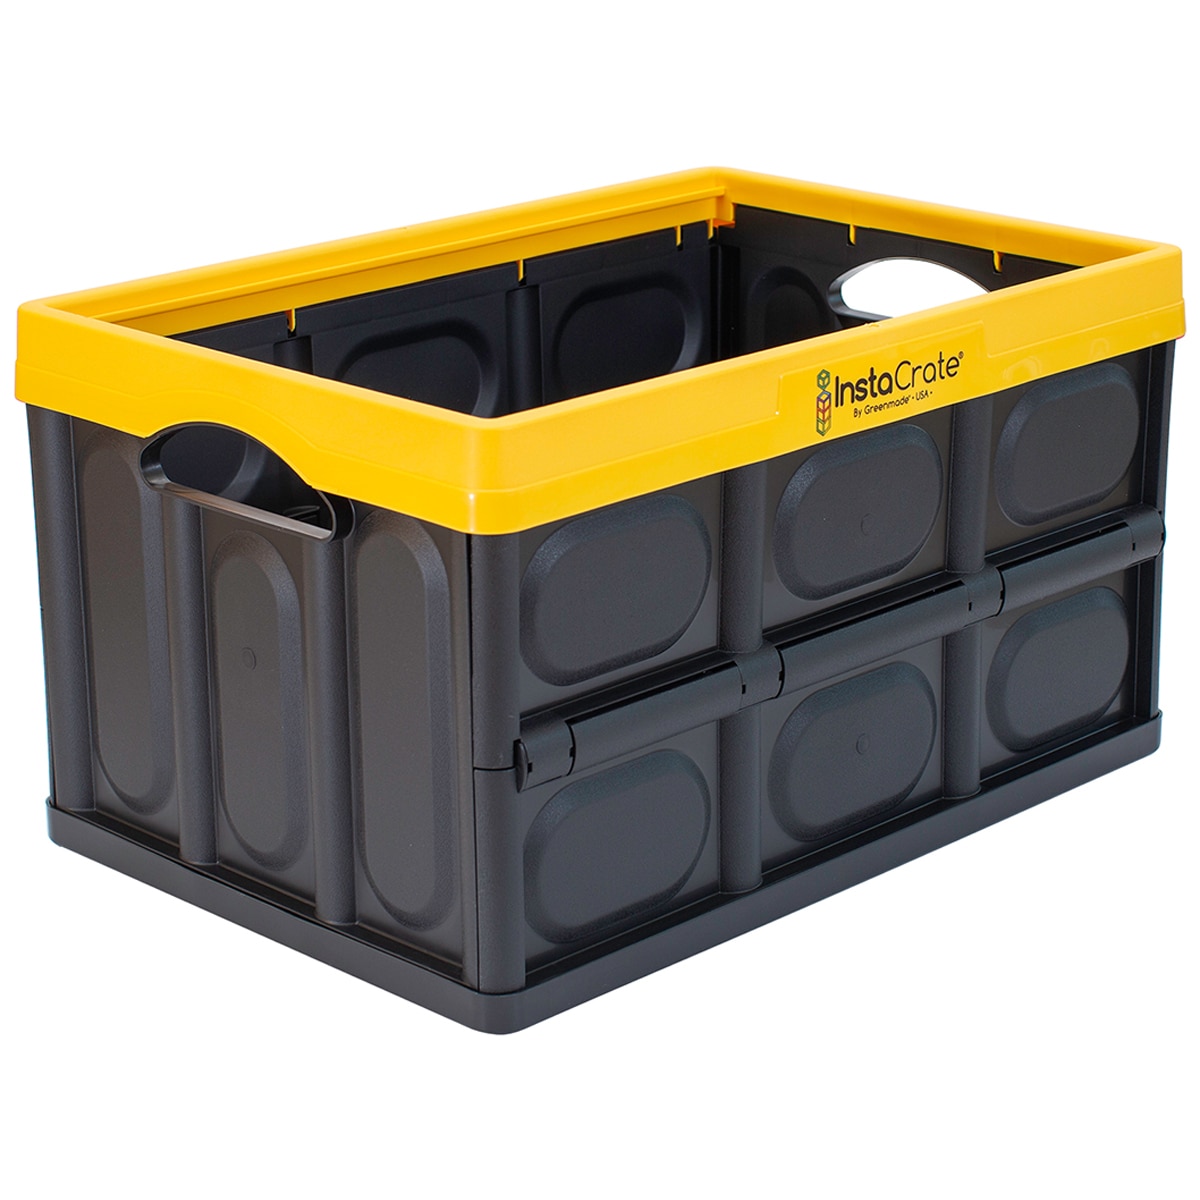 Instacrate Storage Crate Yellow 46L Pack Costco Austr...